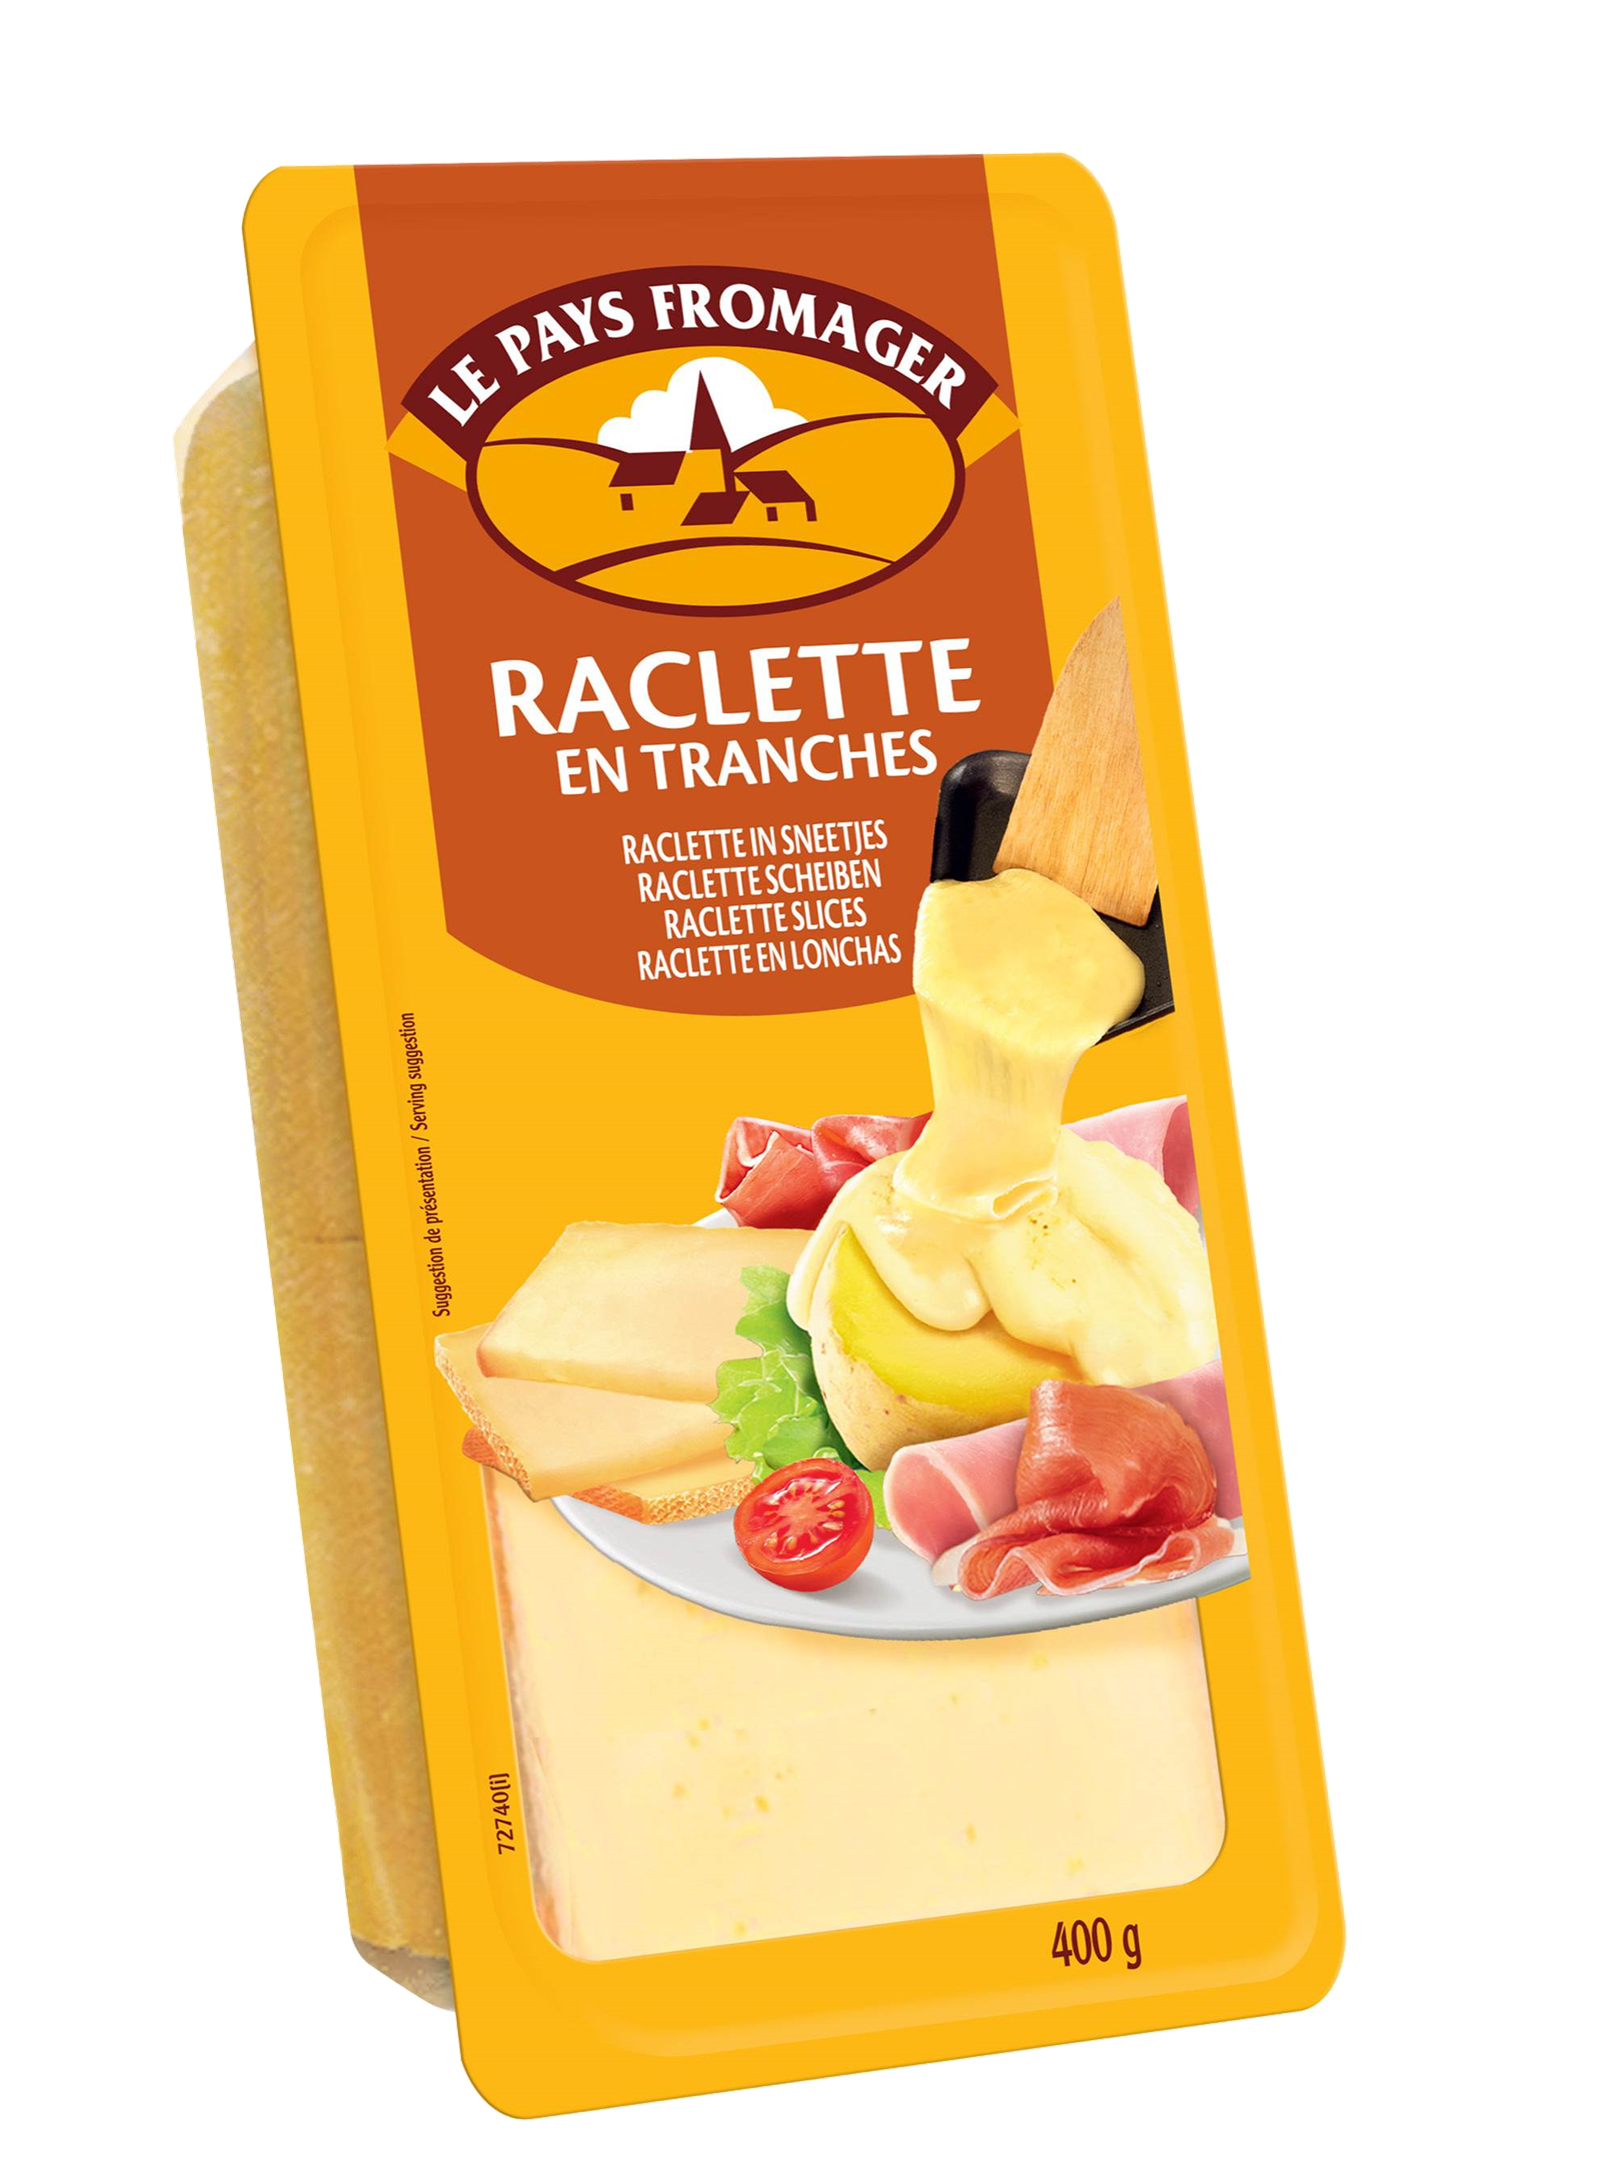 Raclette tranches - barquette 400g - Le Pays Fromager - Sodiaal  Professionnel